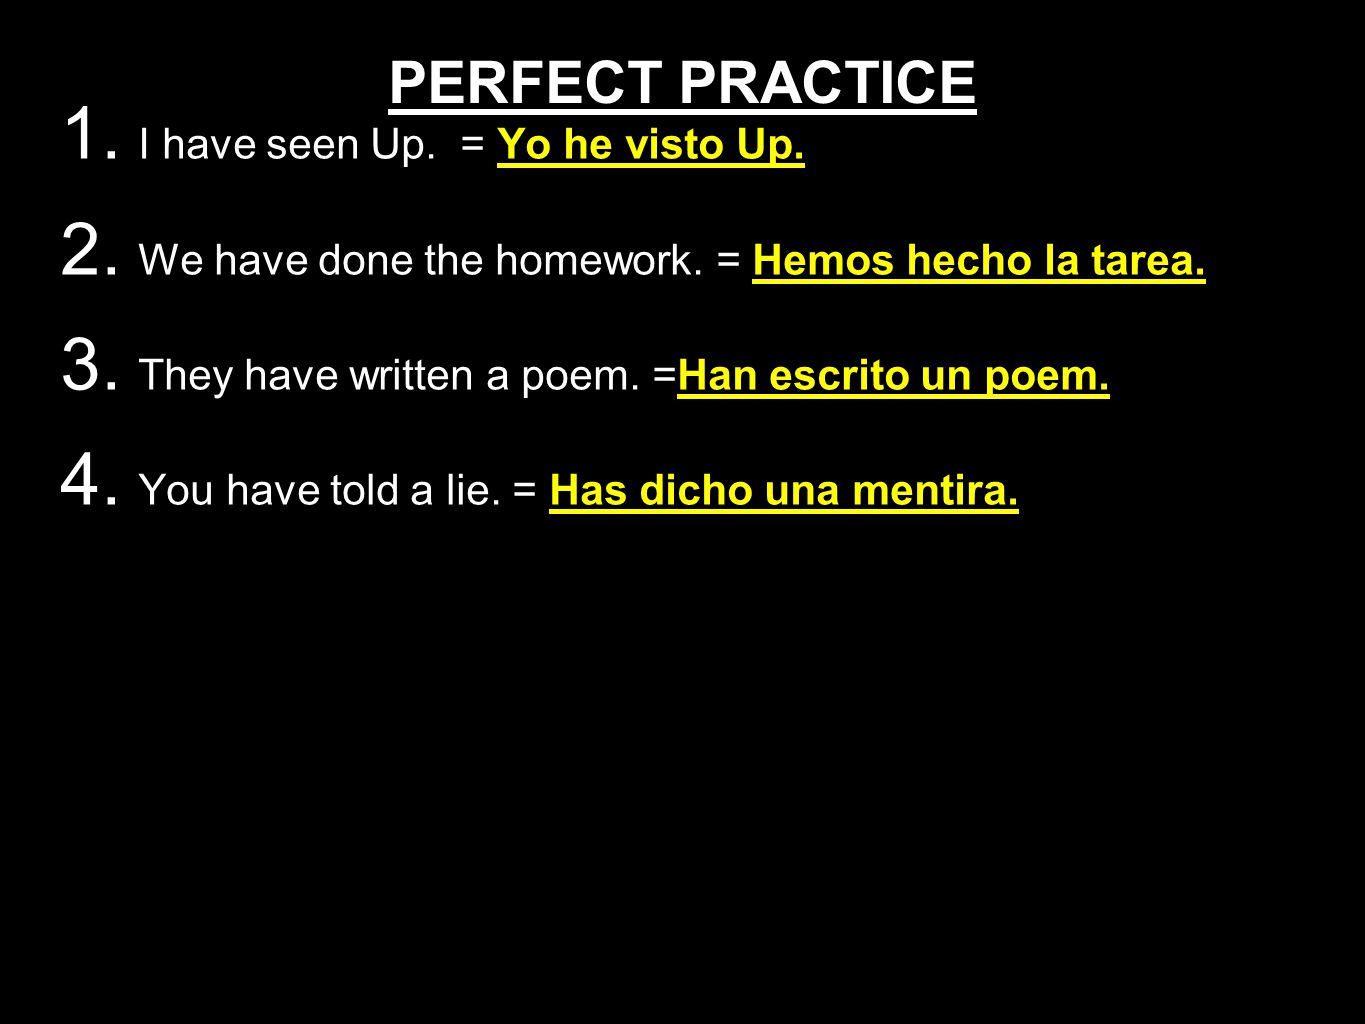 PERFECT PRACTICE 1. I have seen Up. = Yo he visto Up.